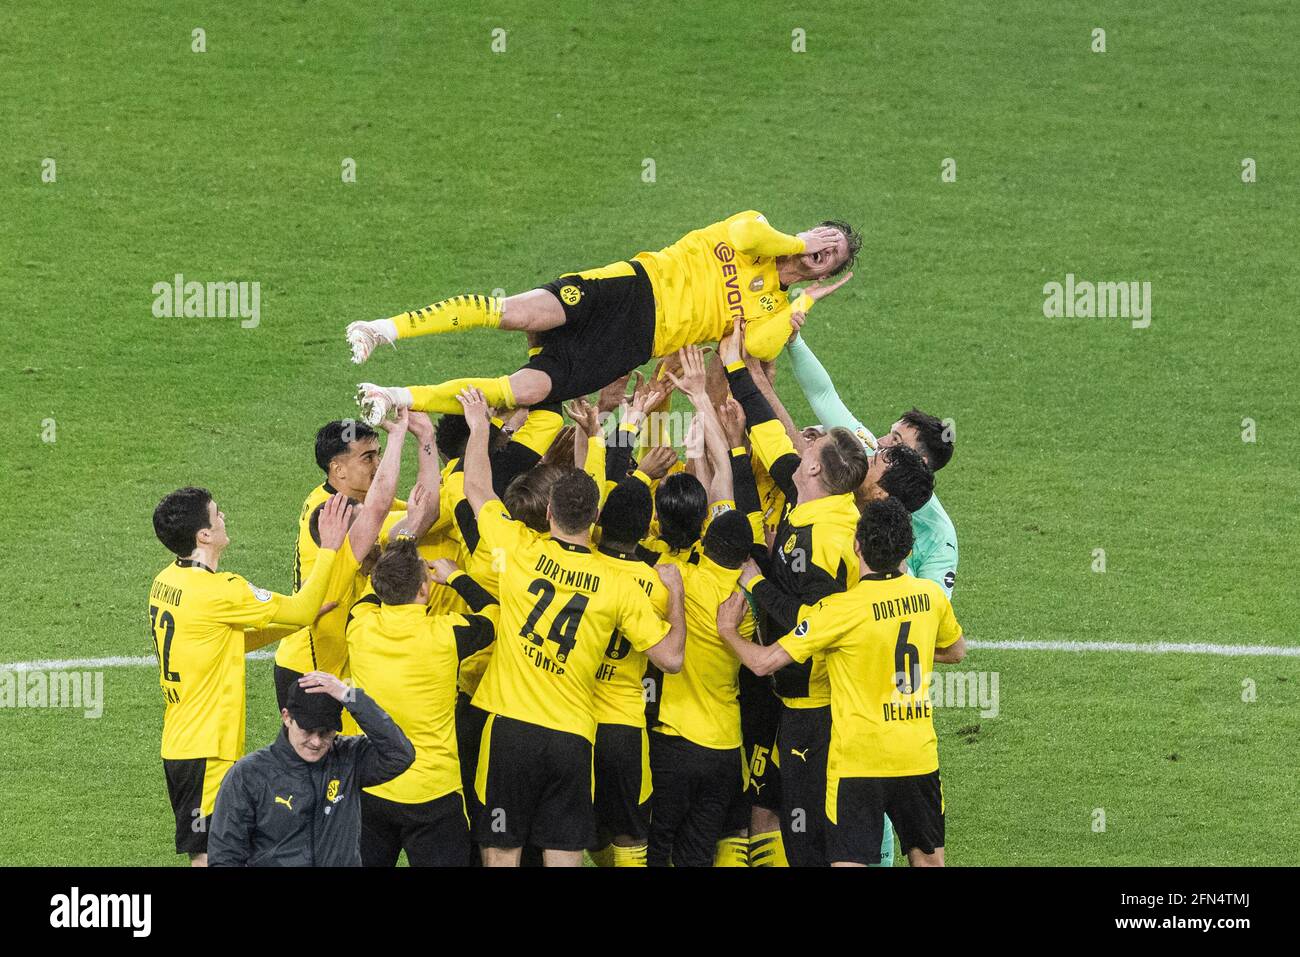 Berlin, Germany. 13th May, 2021. Berlin, Olympiastadion 13.05.21: Lukasz Piszczek (BVB) are celebrated after the victory 4:1 during the final cup match between RB Leipzig vs. Borussia Dortmund. Foto: pressefoto Credit: Mika Volkmann/Alamy Live News Stock Photo